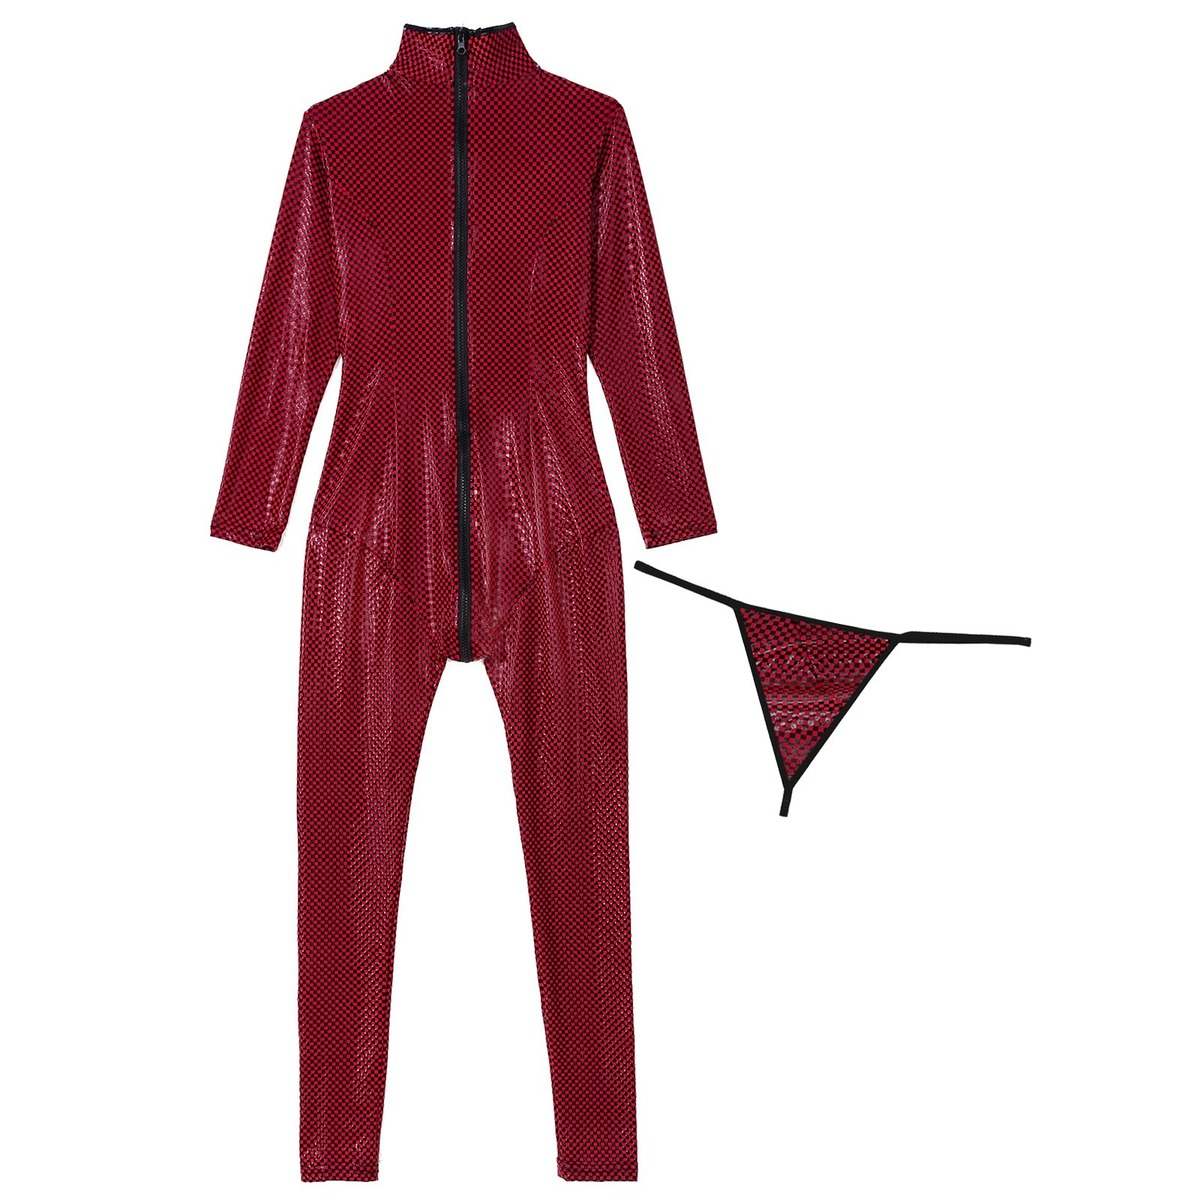 Women's Patent Leather Bodysuit with Long Sleeve / Sexy Skinny Jumpsuit on Zipper - EVE's SECRETS